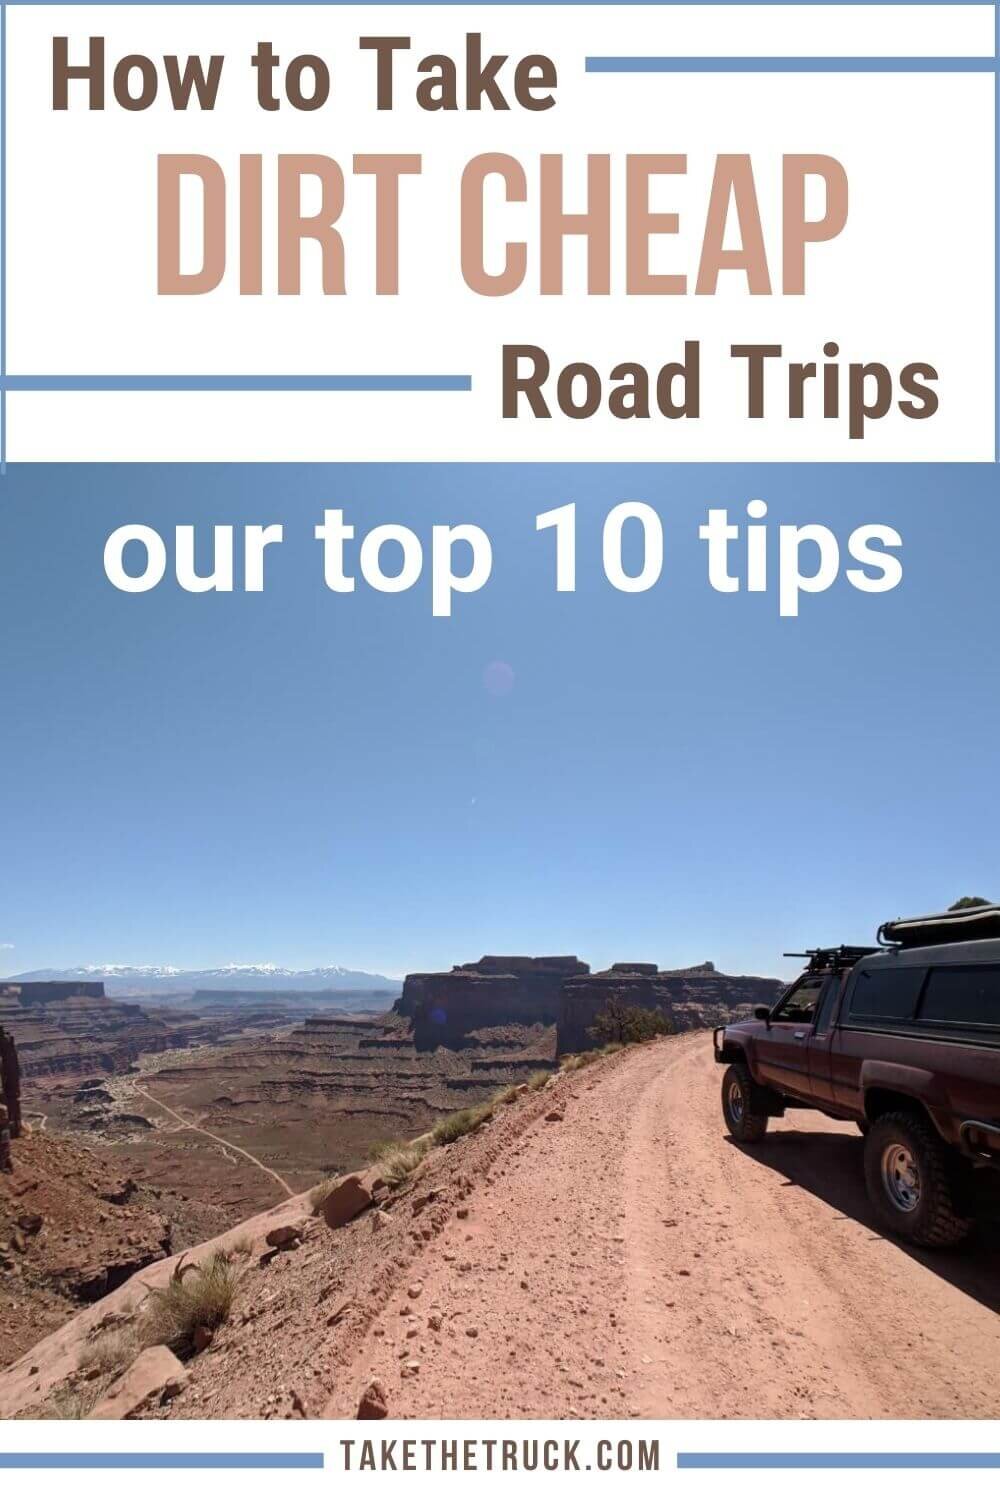 Looking for budget road trip tips and info on how to plan a cheap cross country road trip on a budget? This post gives our top ten budget road trip tips to save money on your next road trip adventure!